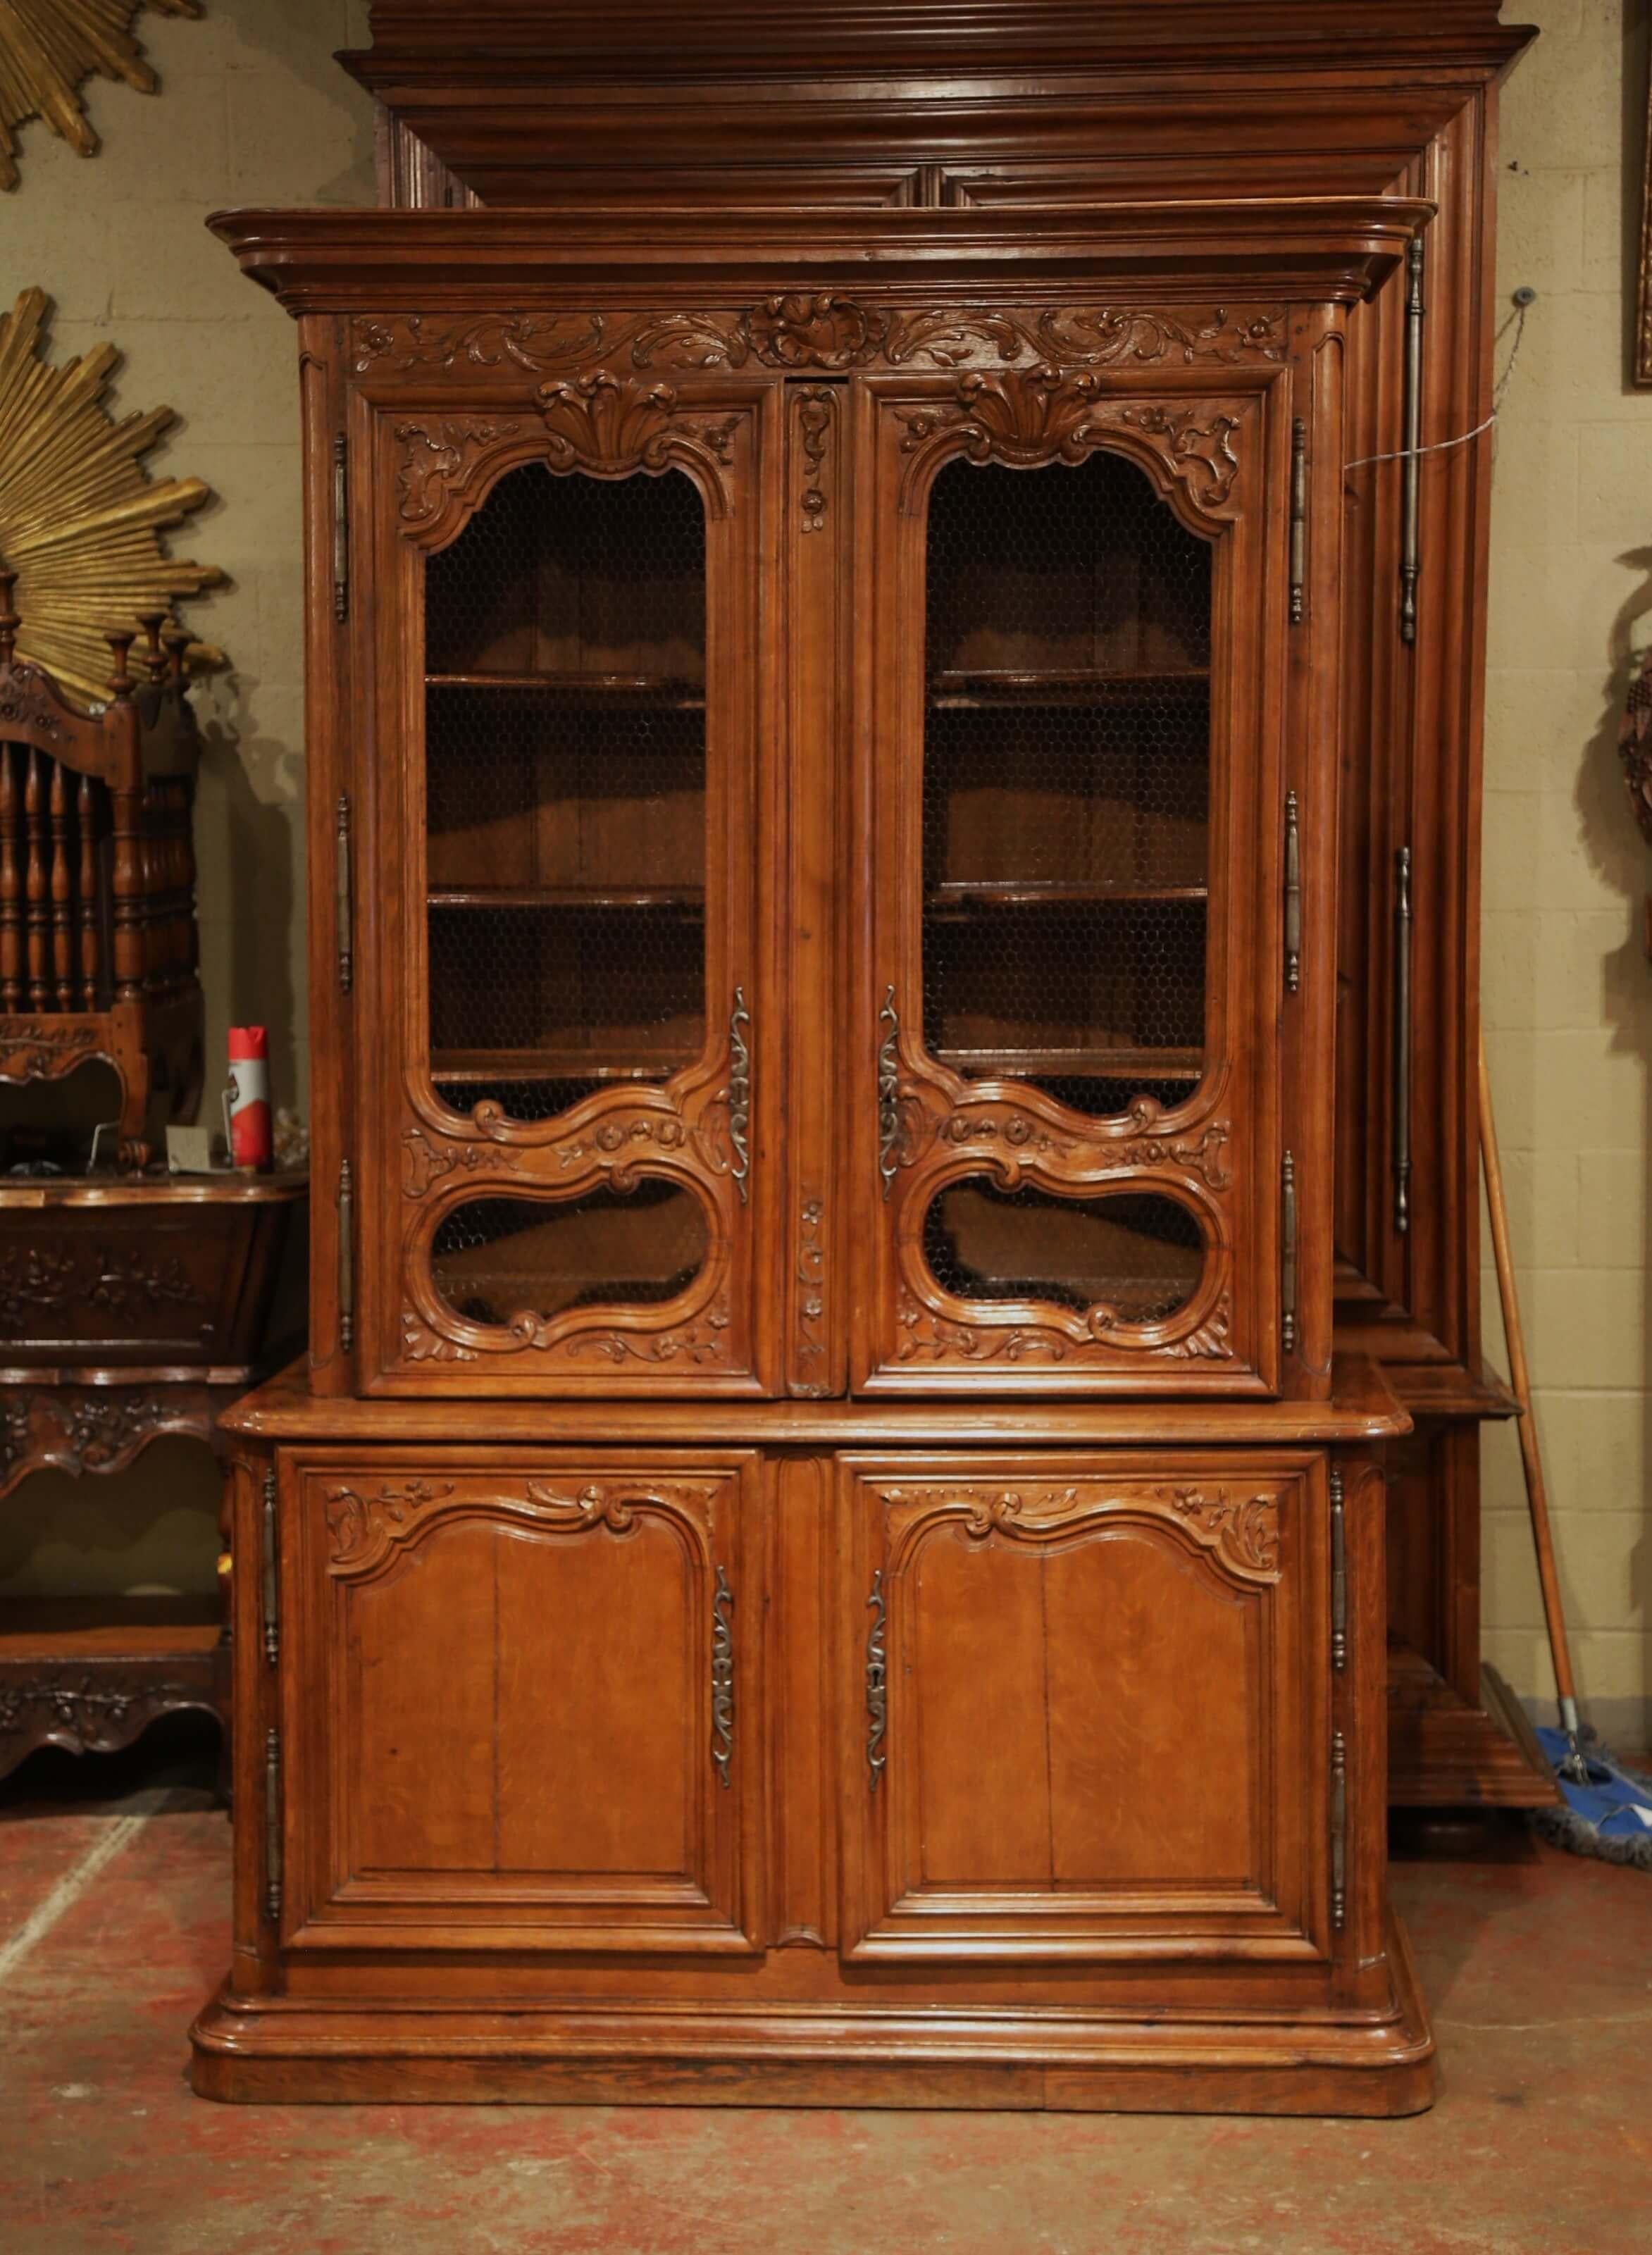 Display your fine Quimper or China collection in this museum quality antique display cabinet. Crafted in Normandy circa 1760, the exceptional buffet deux-corps is in immaculate condition. The cabinet features a flat molded cornice over foliage